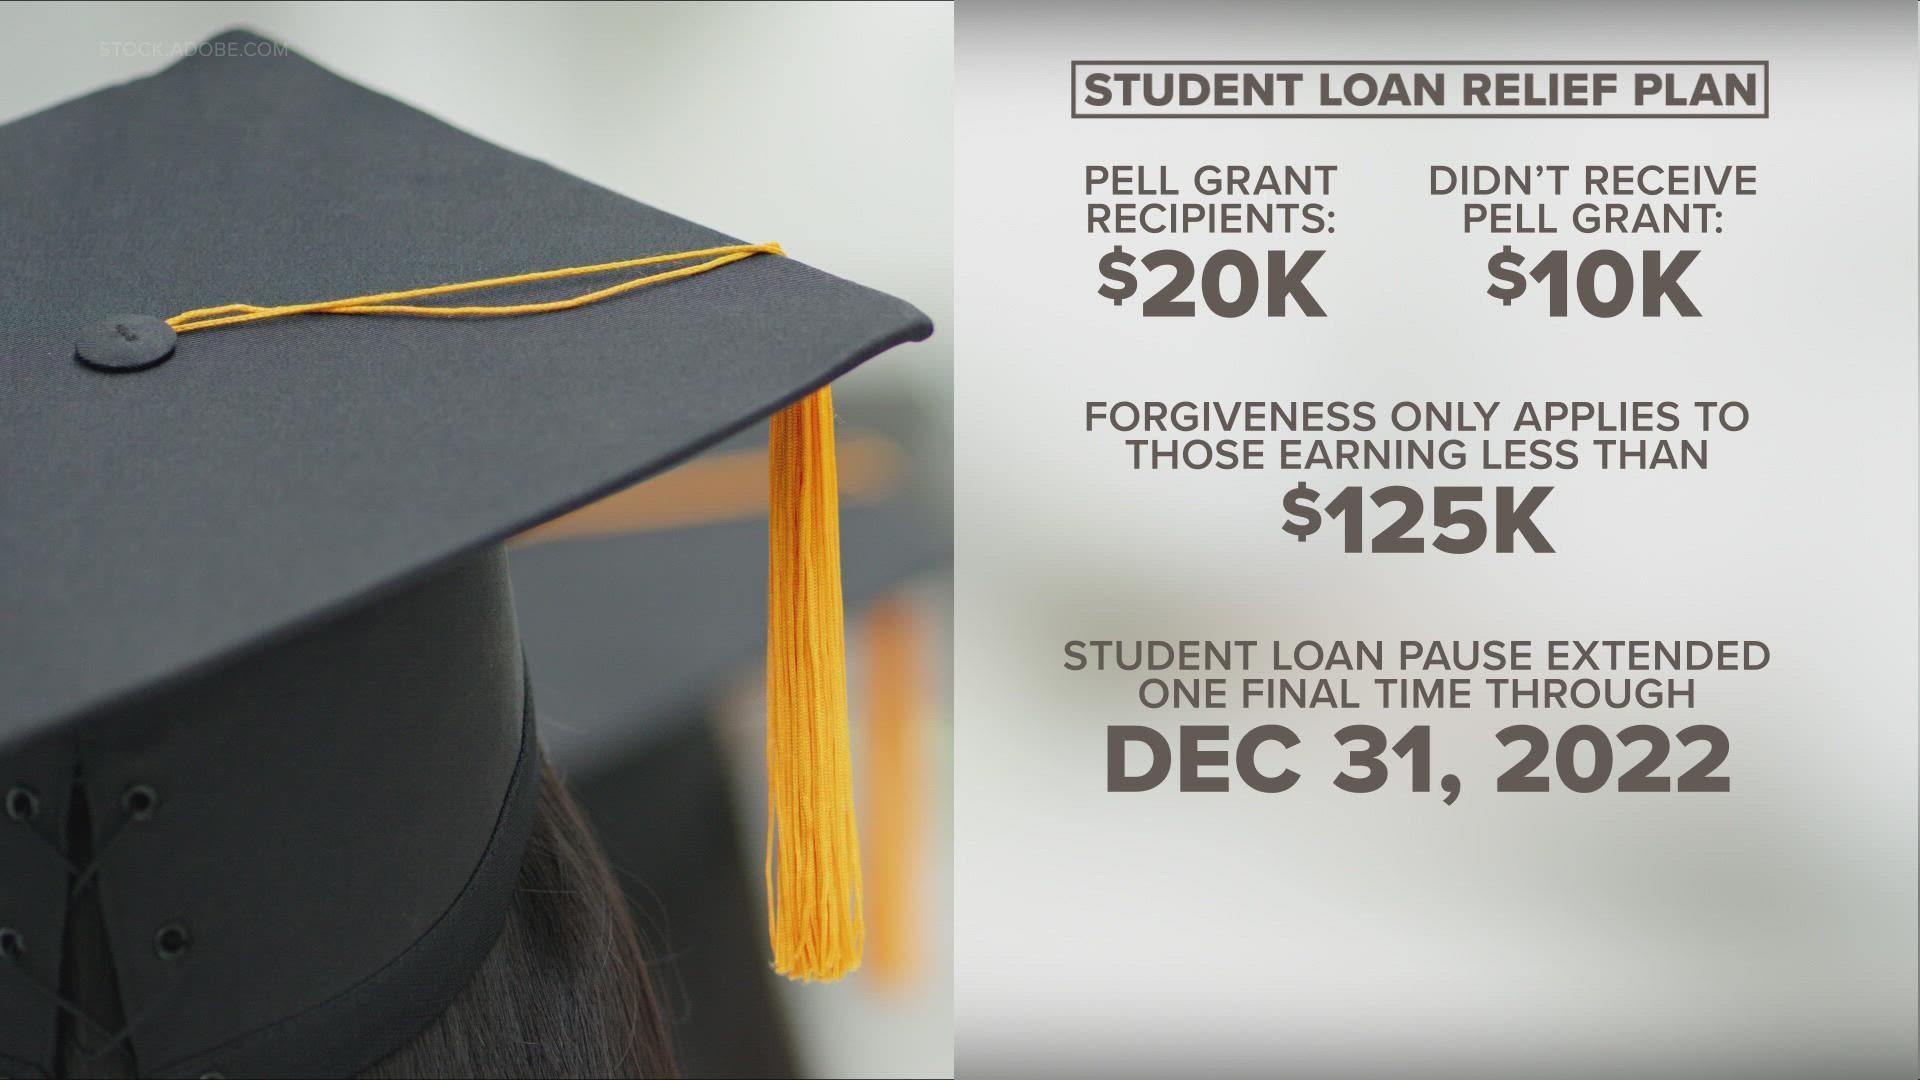 President Joe Biden announced a long-awaited plan to forgive some federal student debt Wednesday — but not everyone qualifies.